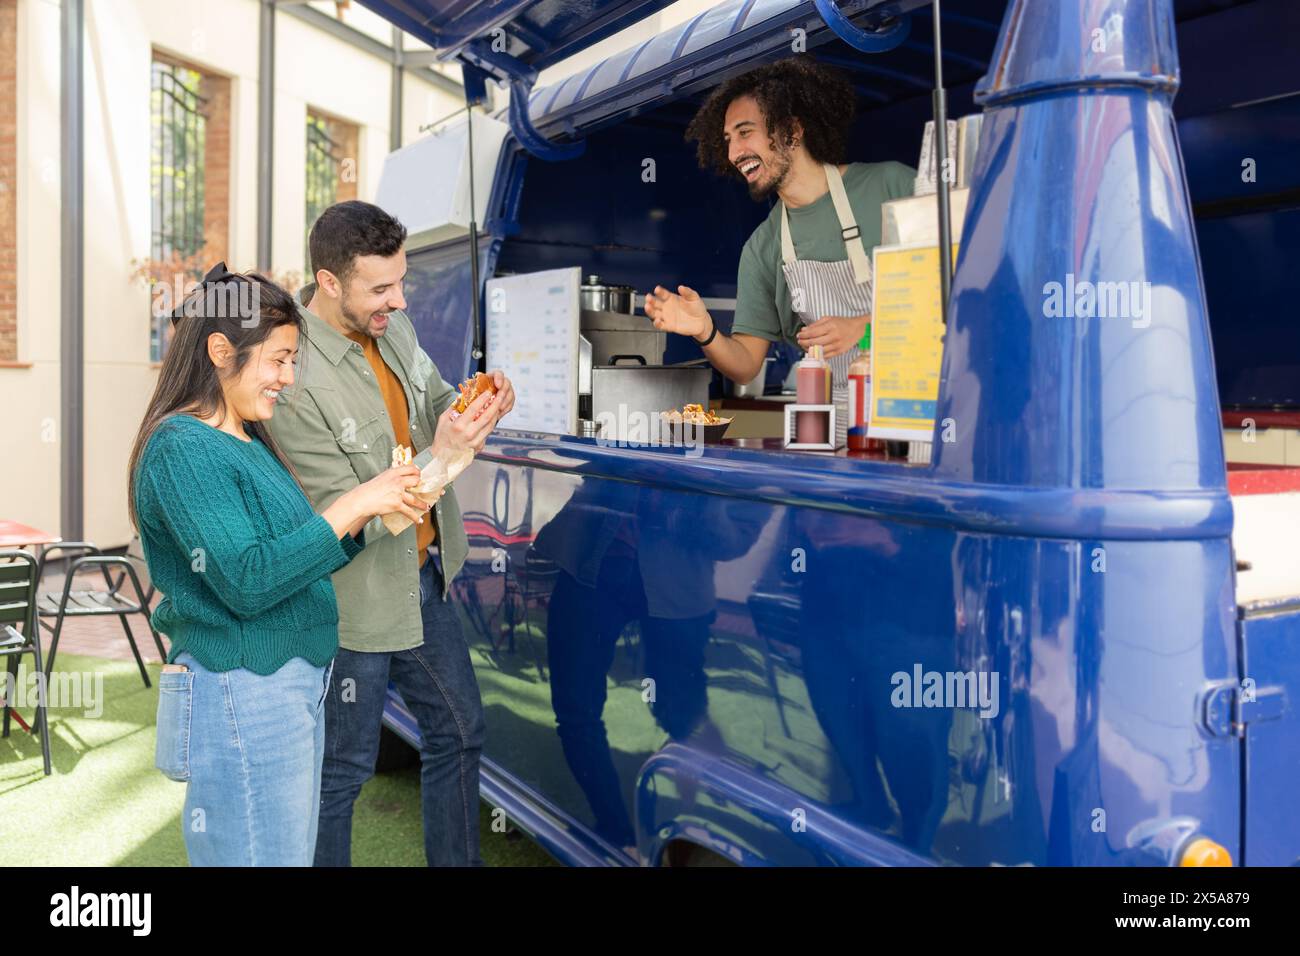 A group of friends share a laugh while purchasing fast food from a cheerful vendor inside a vibrant blue food truck Stock Photo